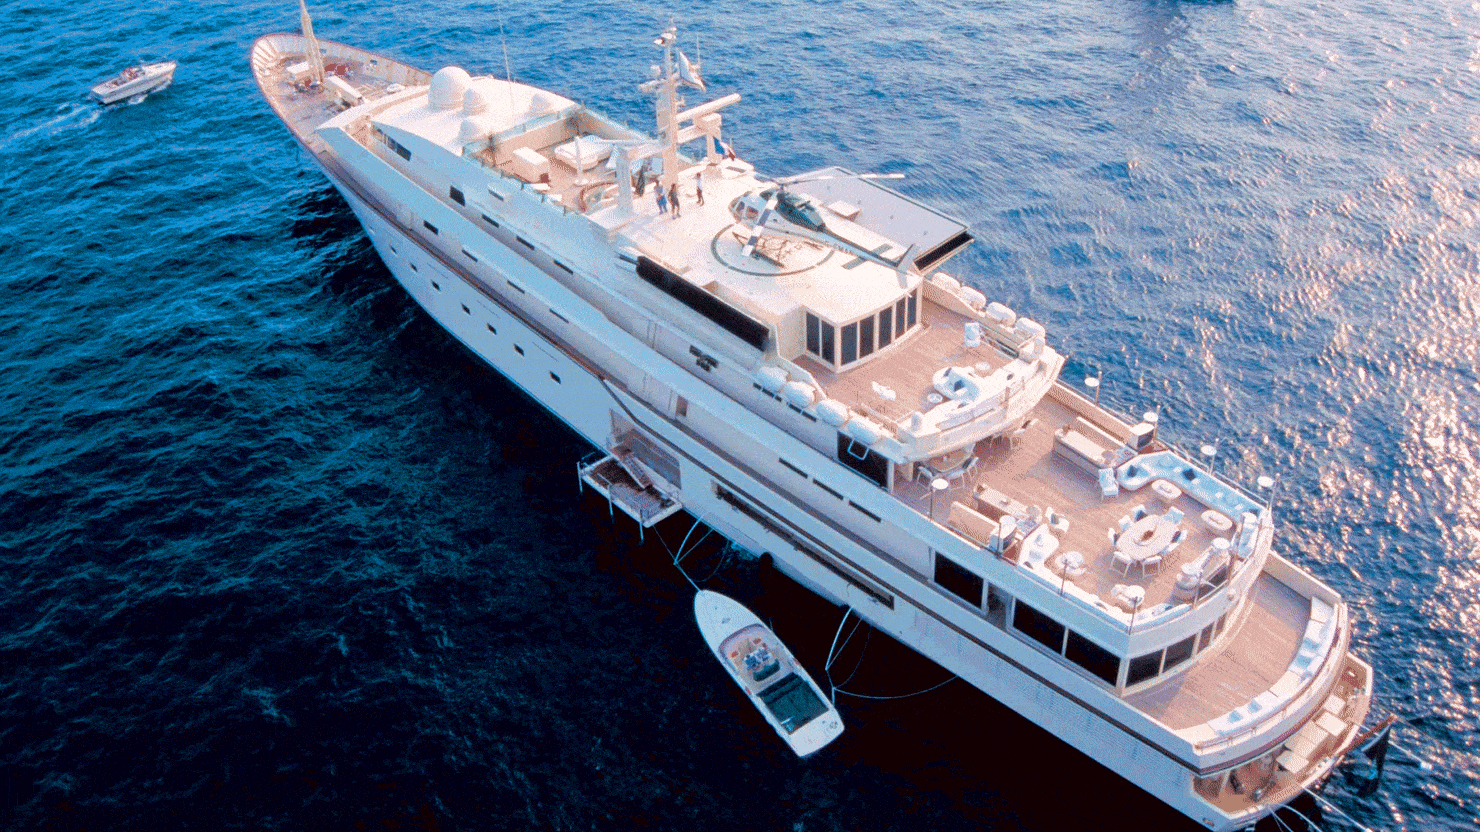 Where Did All the Superyachts Go?